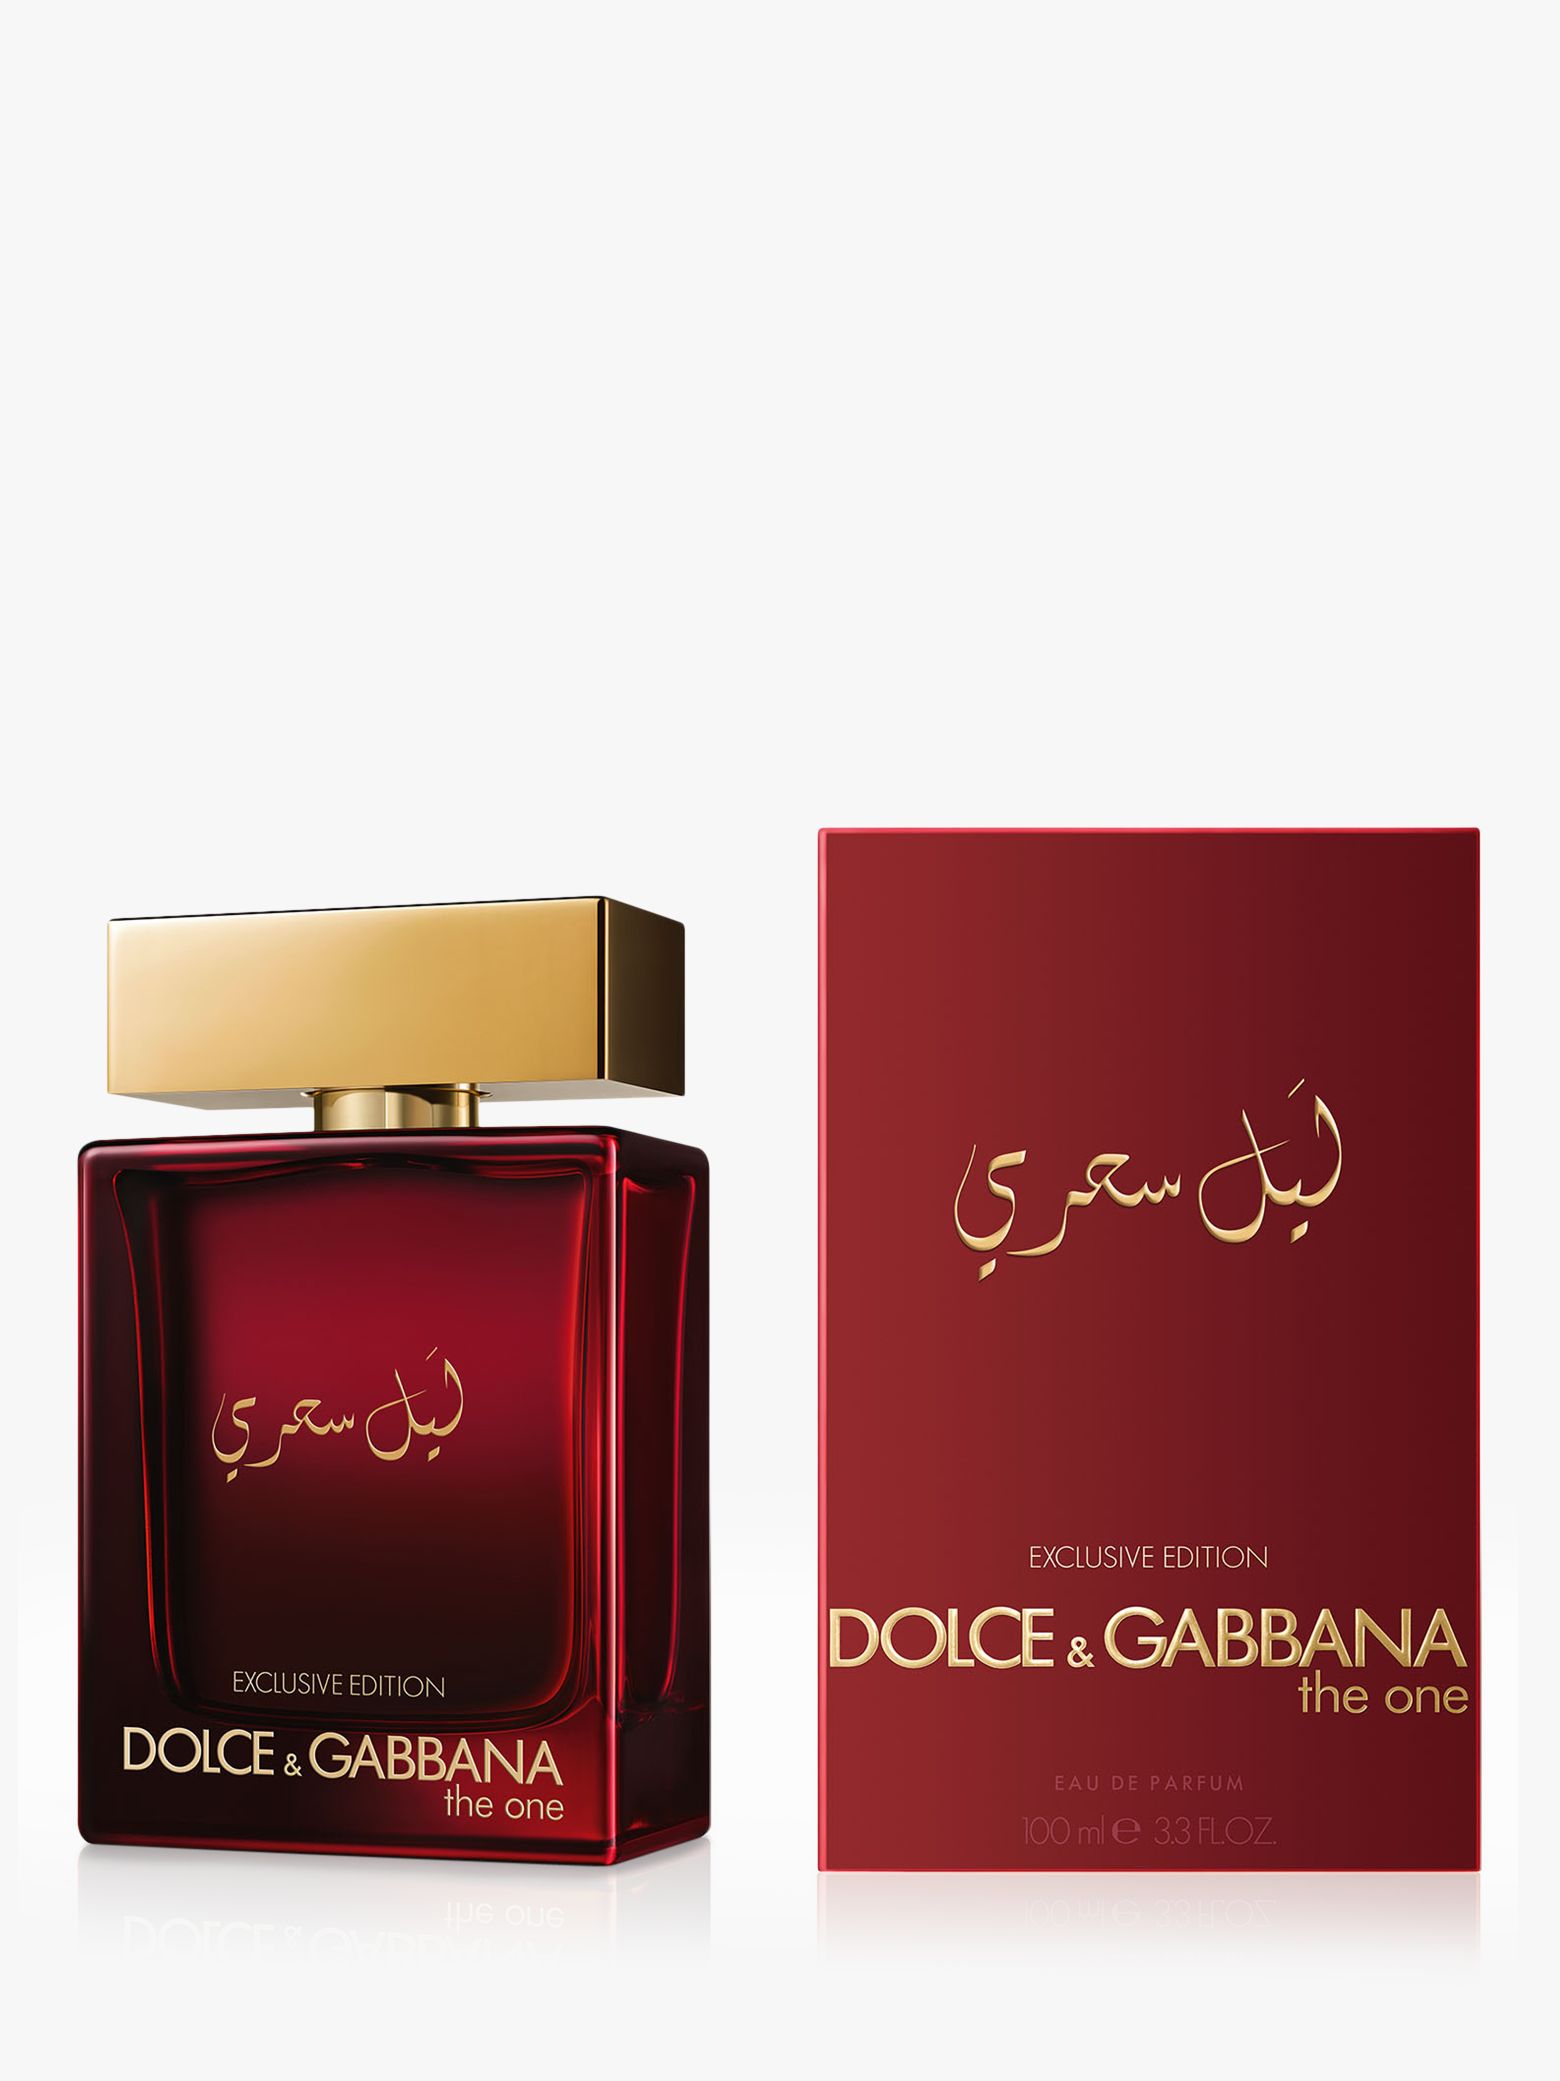 dolce gabbana the one review